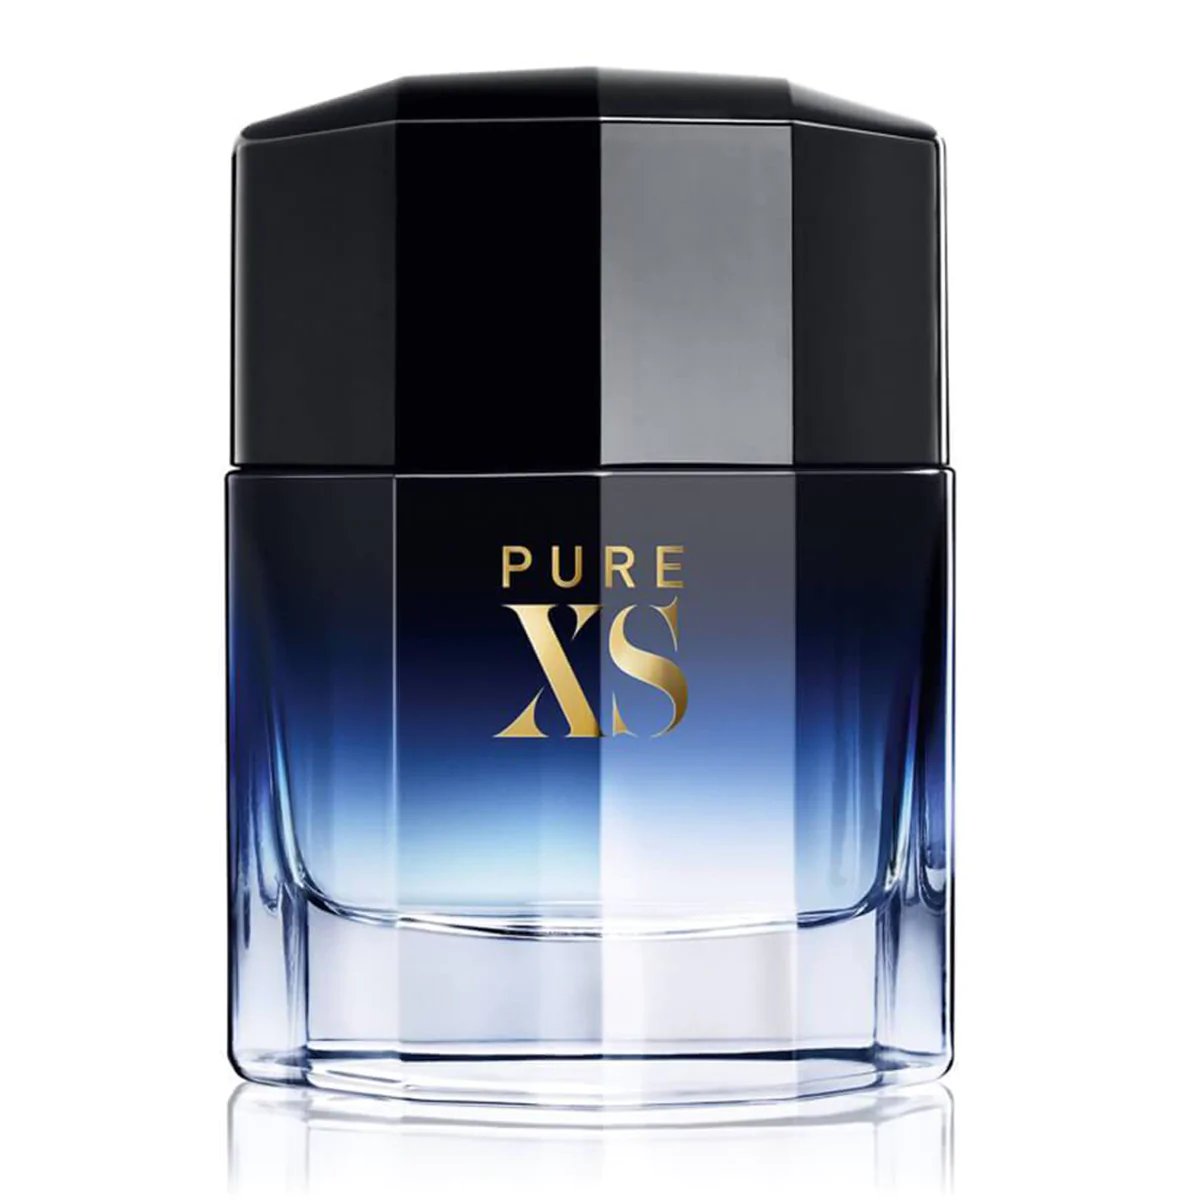 Paco Rabanne Pure XS Pure Excess For Men EDT 100Ml - AllurebeautypkPaco Rabanne Pure XS Pure Excess For Men EDT 100Ml